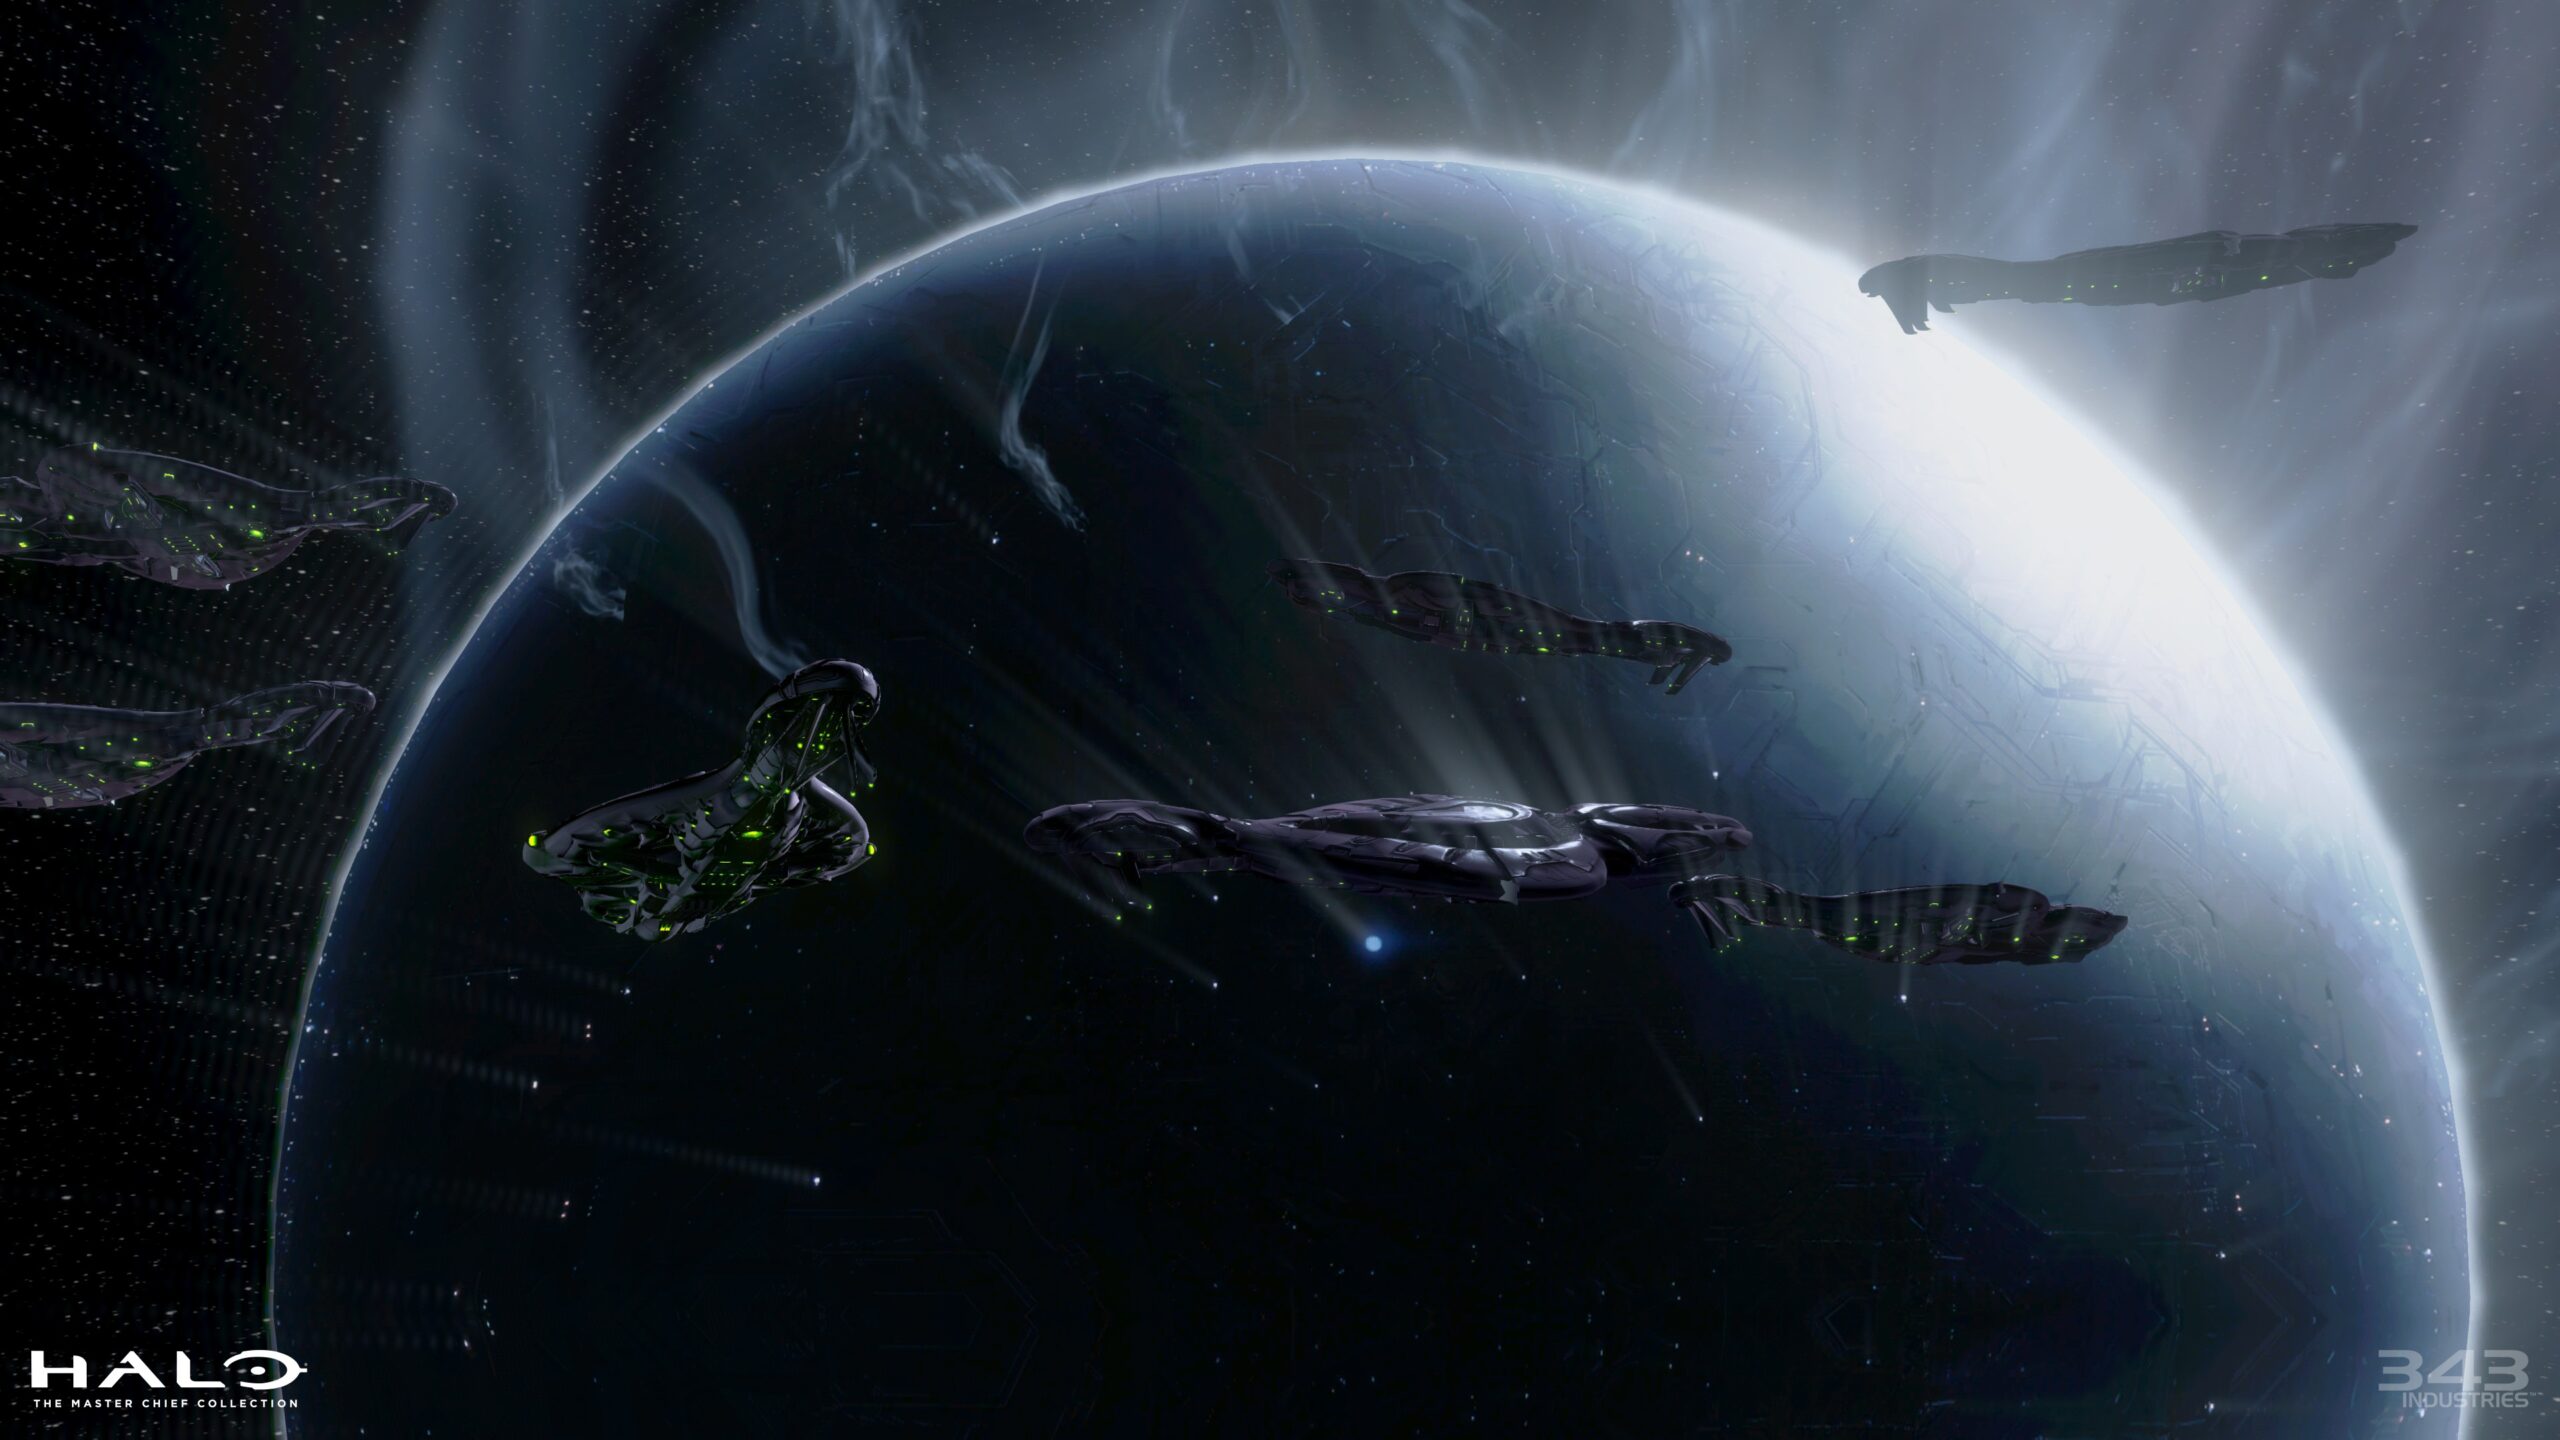 Halo 4 screenshot of Requiem with seven Covenant ships around it